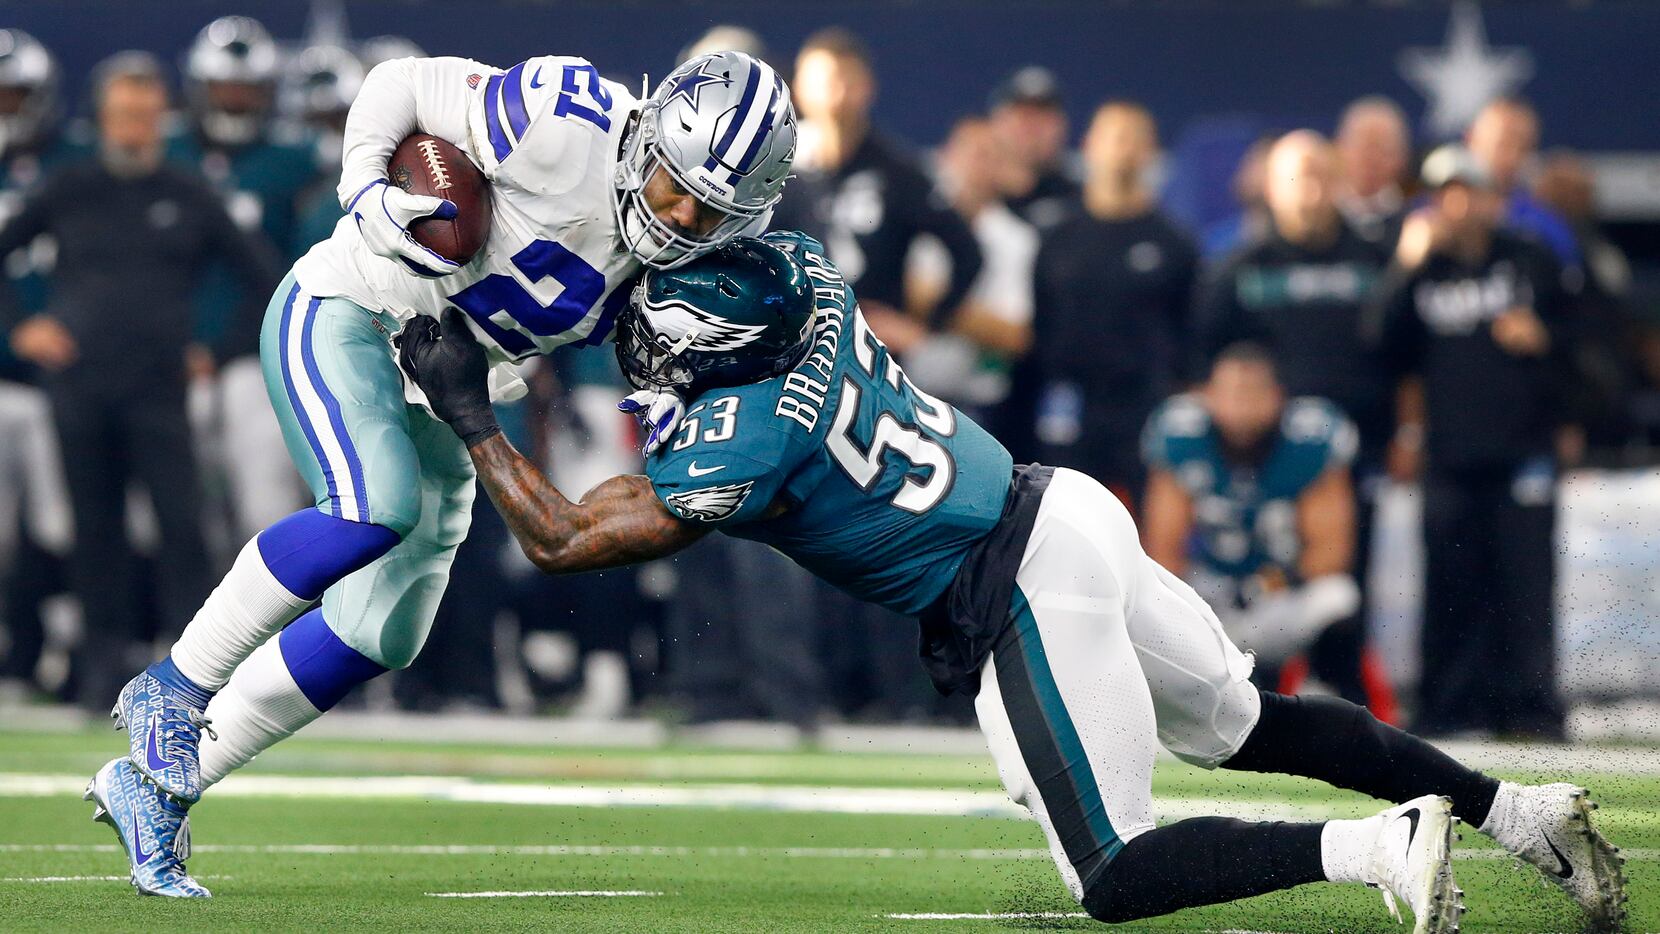 Cowboys RB Ezekiel Elliott has never lost to the Eagles. How does